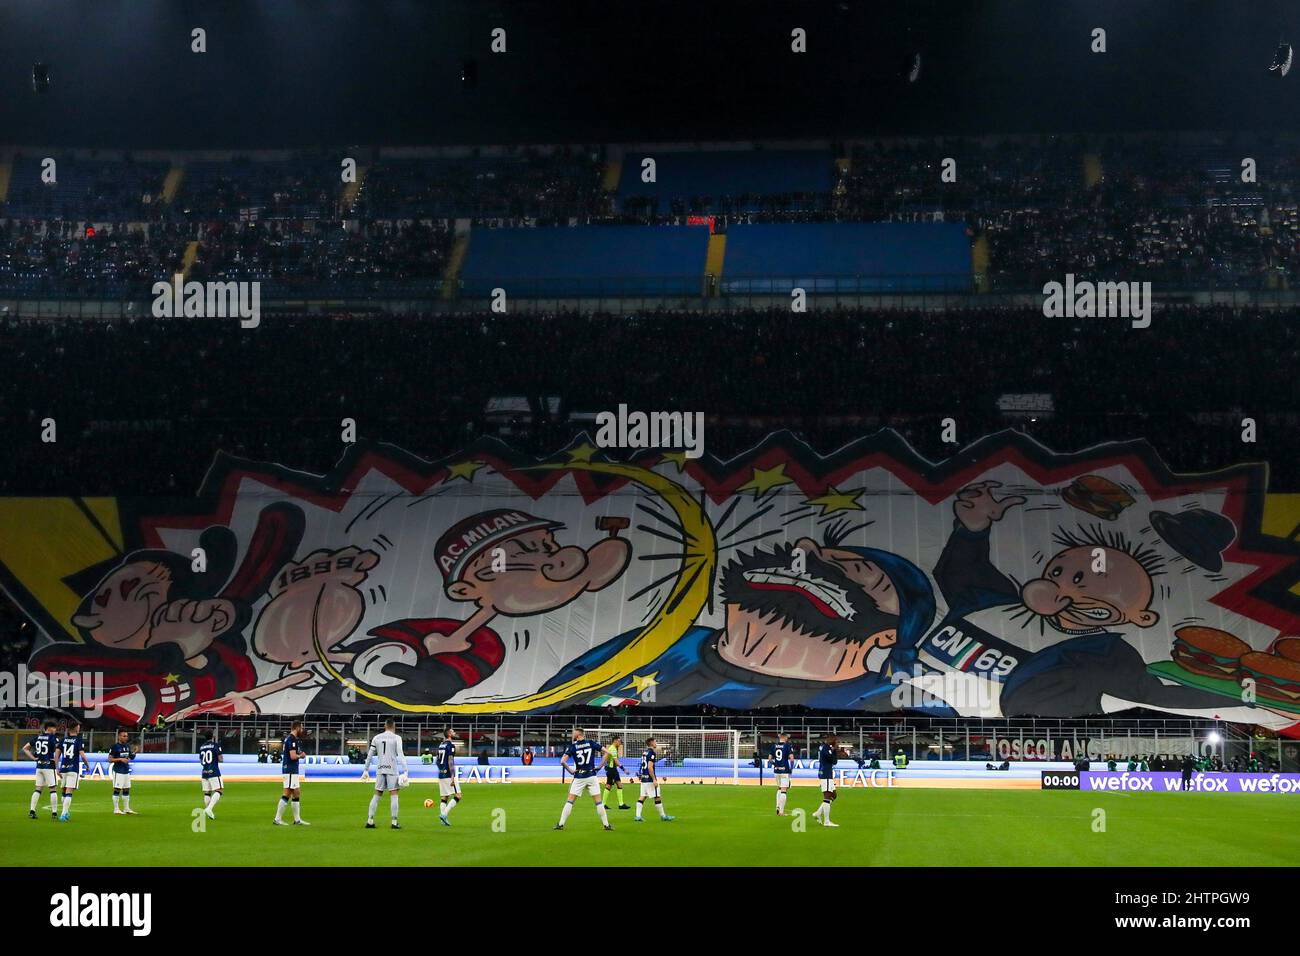 lonely Engage Silicon AC Milan fans choreography prior to kick off during the Coppa Italia  2021/22 football match between AC Milan and FC Internazionale at Giuseppe  Meazza Stadium, Milan, Italy on March 01, 2022 (Photo